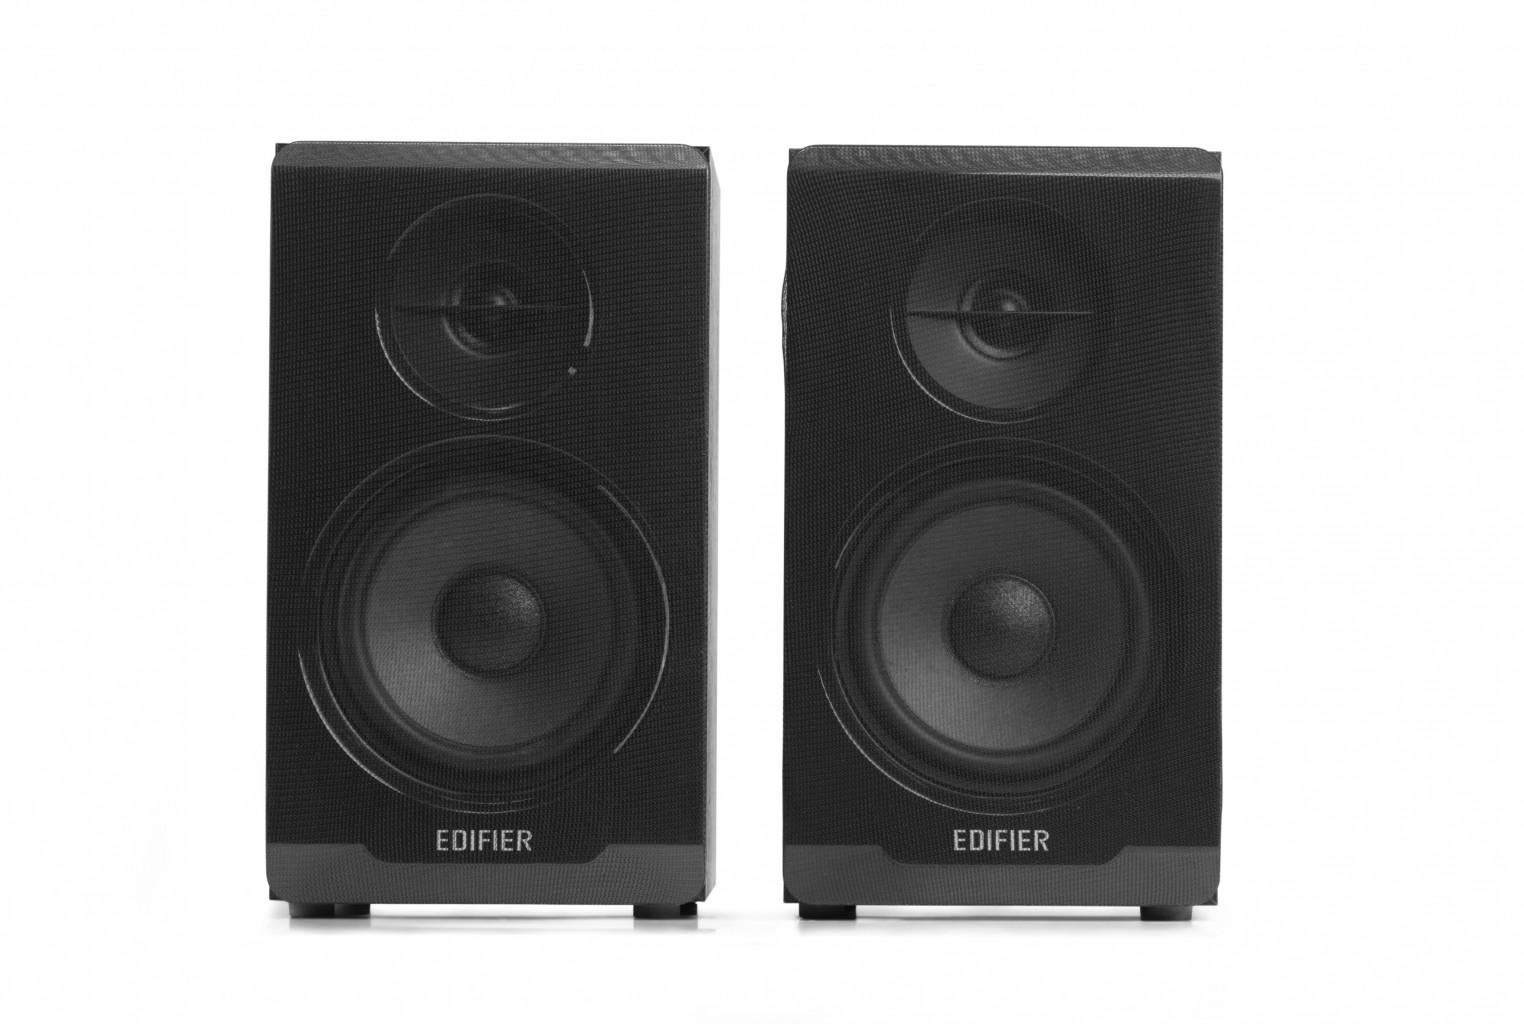 Edifier R33BT Active Bluetooth Speaker - V5.0 1/2 inch Tweeter  3.5 inch Mid/Bass Driver, 10W RMS Power Output, 70Hz-20KHz, ≥85dB(A), Wooden Enclosure